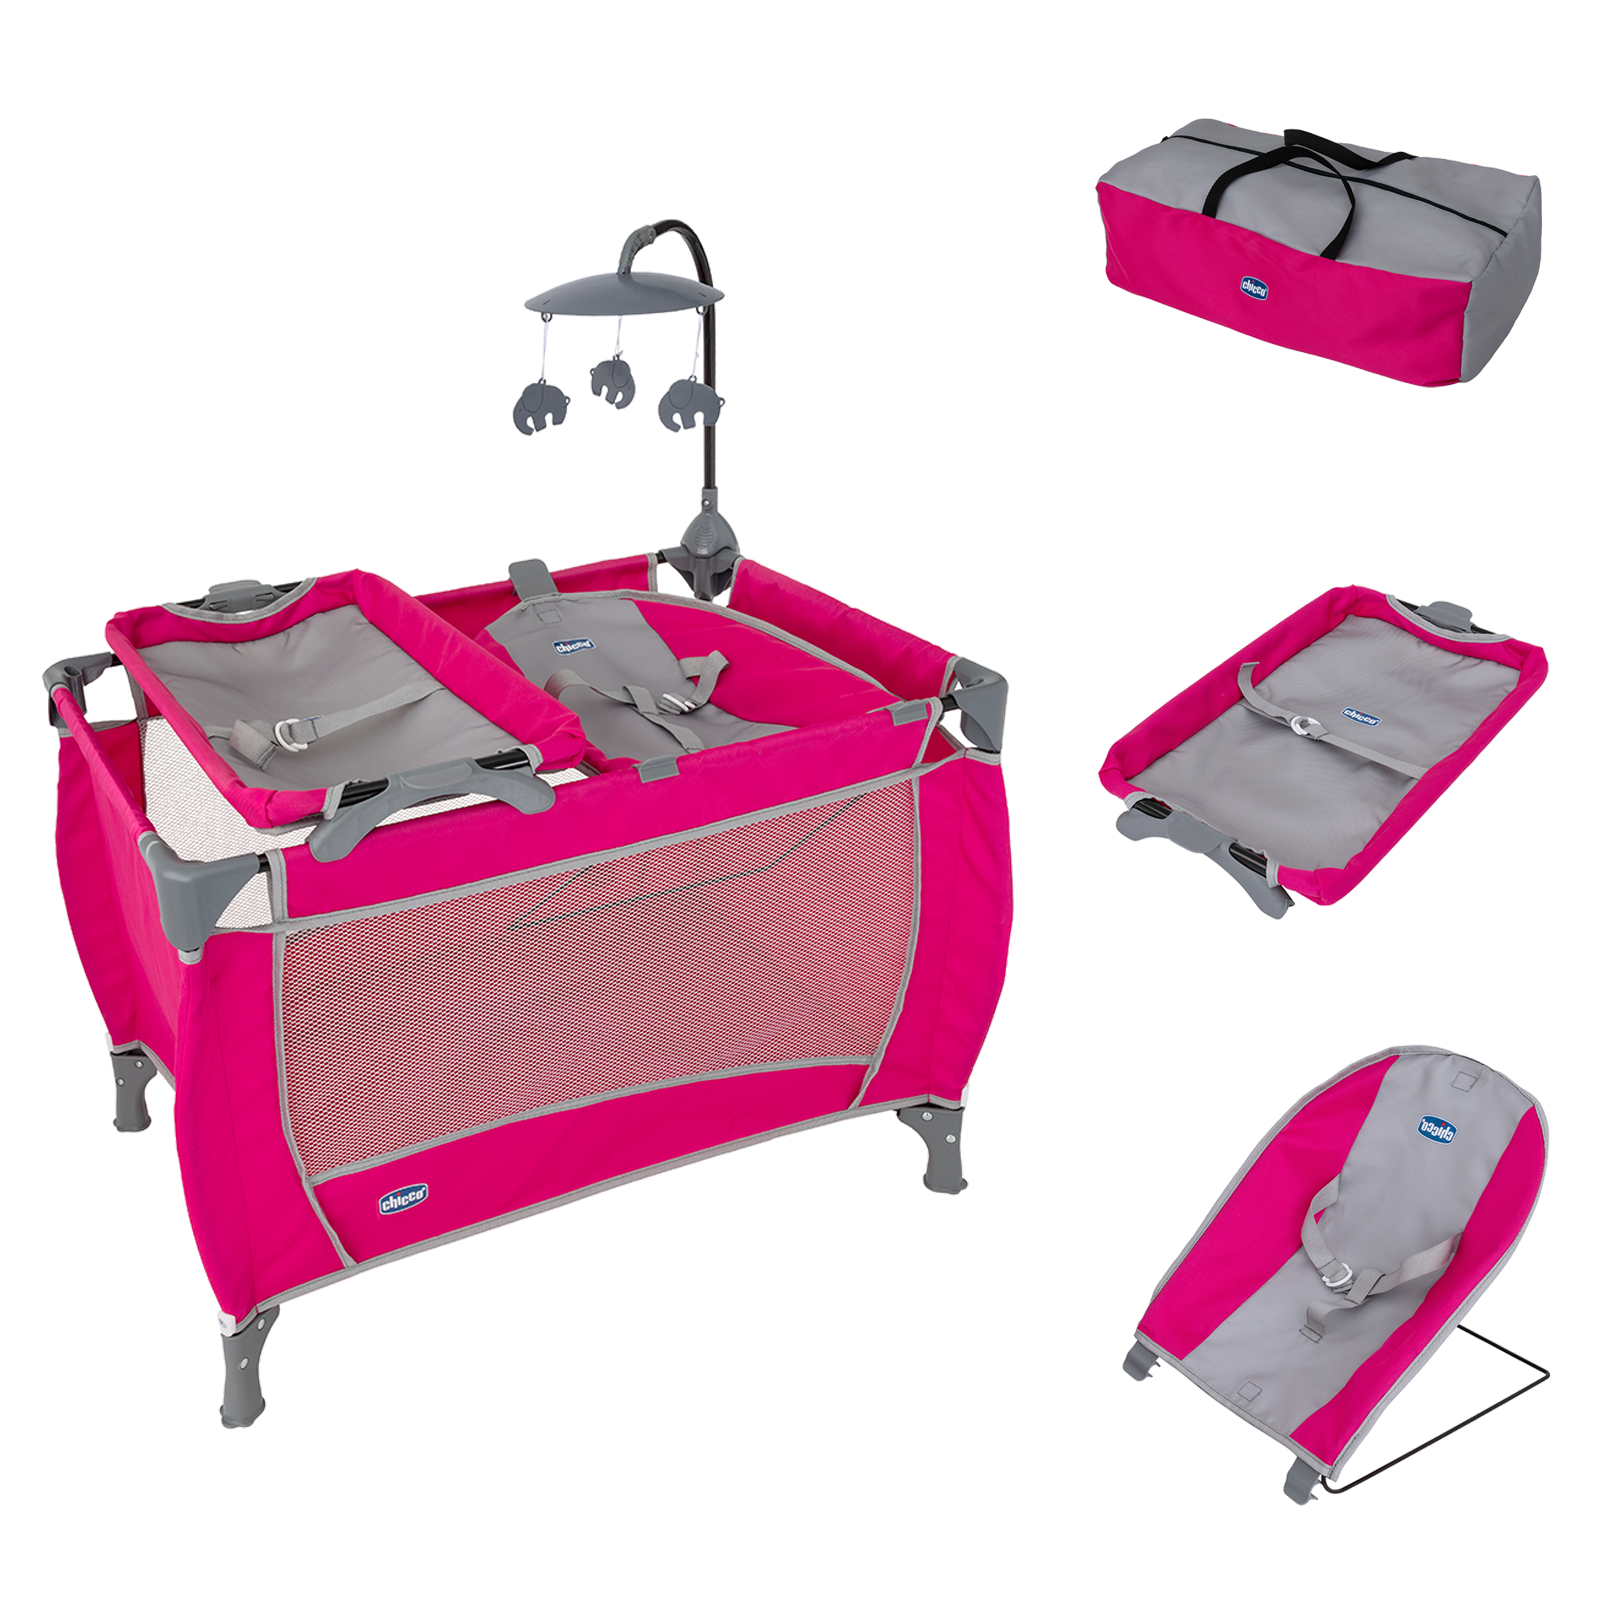 Chicco Junior Dolls Lullaby Dream 3in1 Travel Cot, Bouncer, Changer & Travel Bag - Pink (3 - 6 Years)